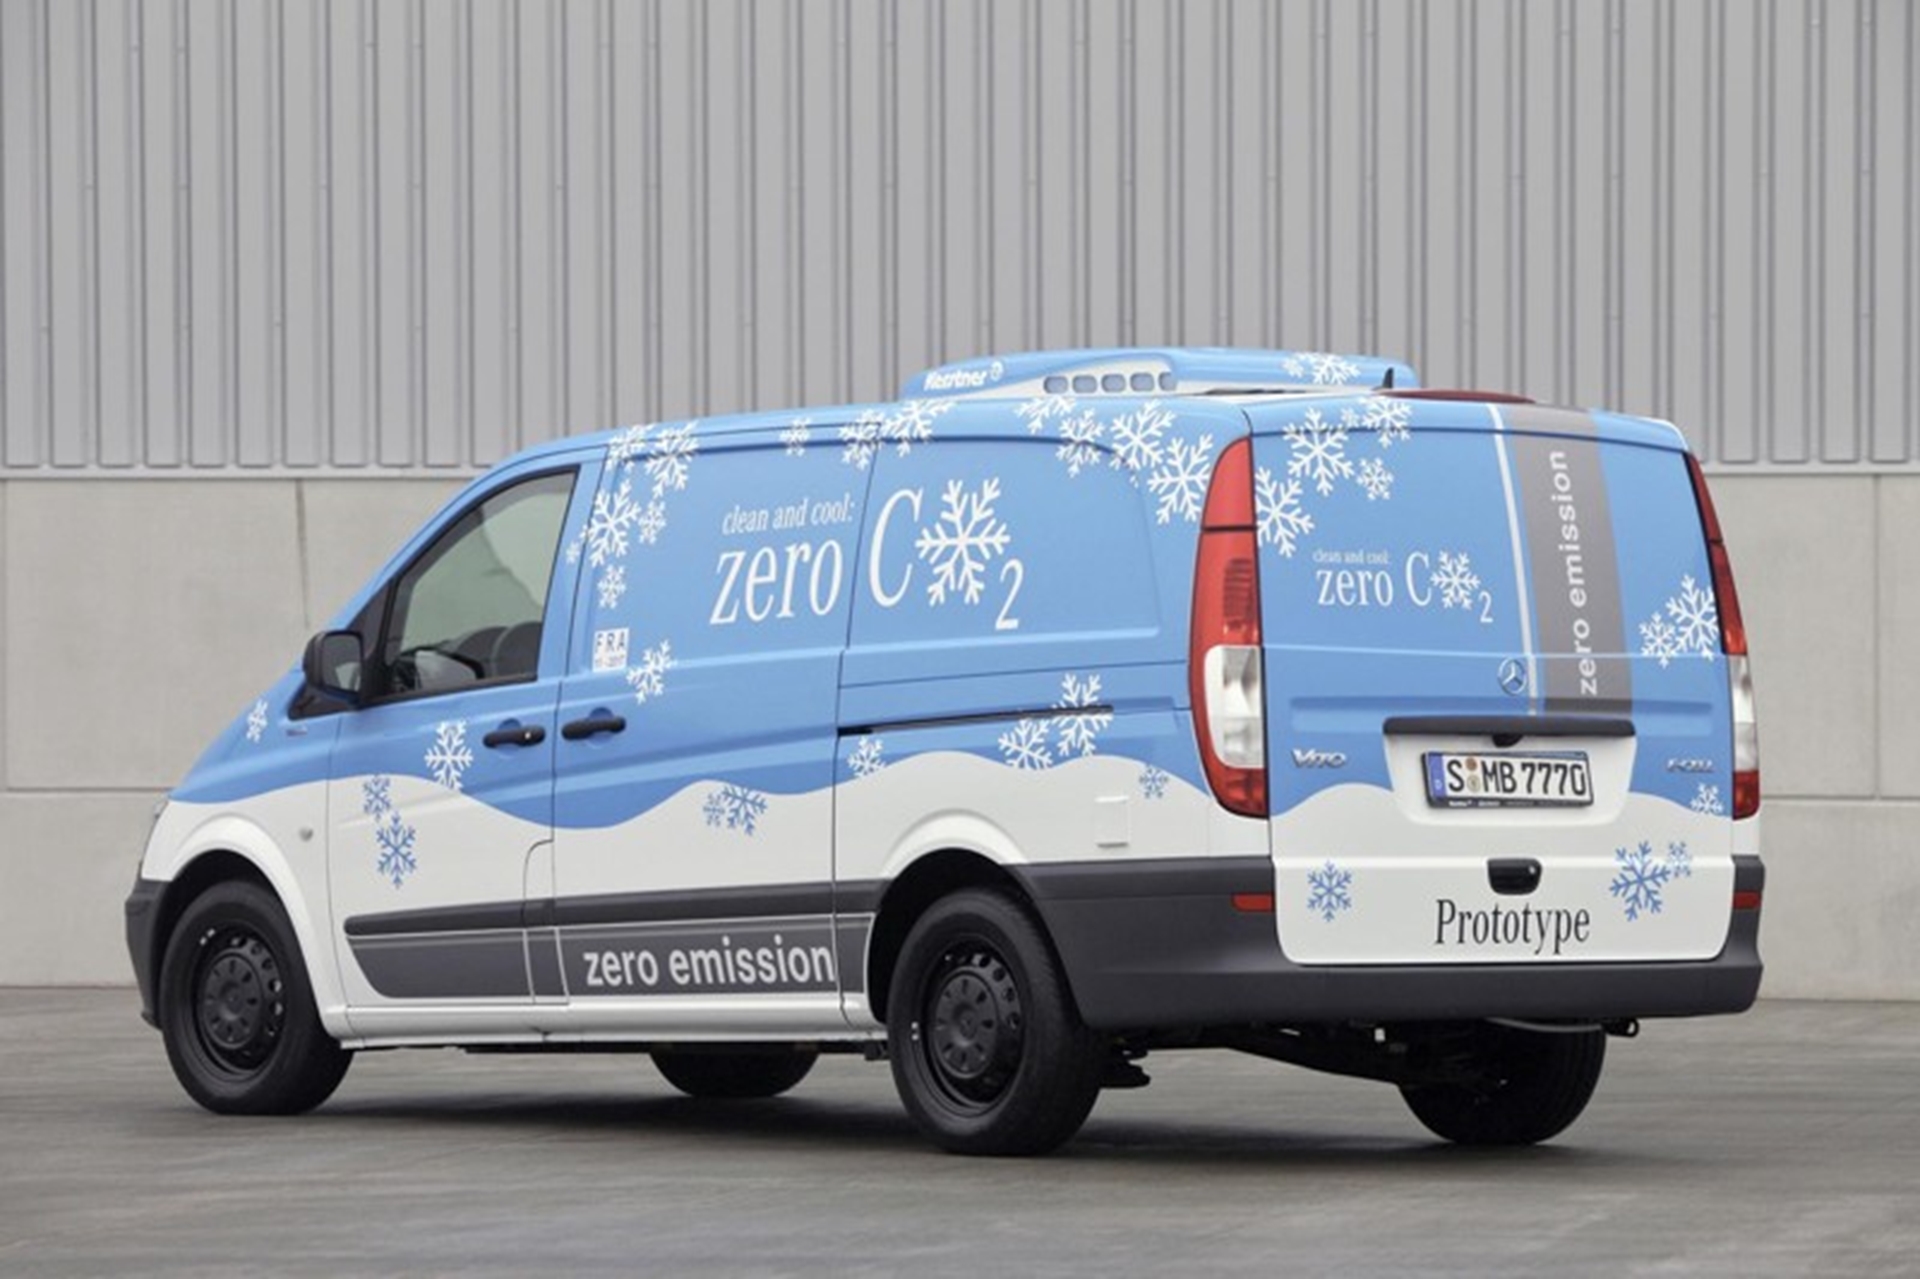 Mercedes-Benz showcases the Vito E-CELL at the Post Expo in Stuttgart